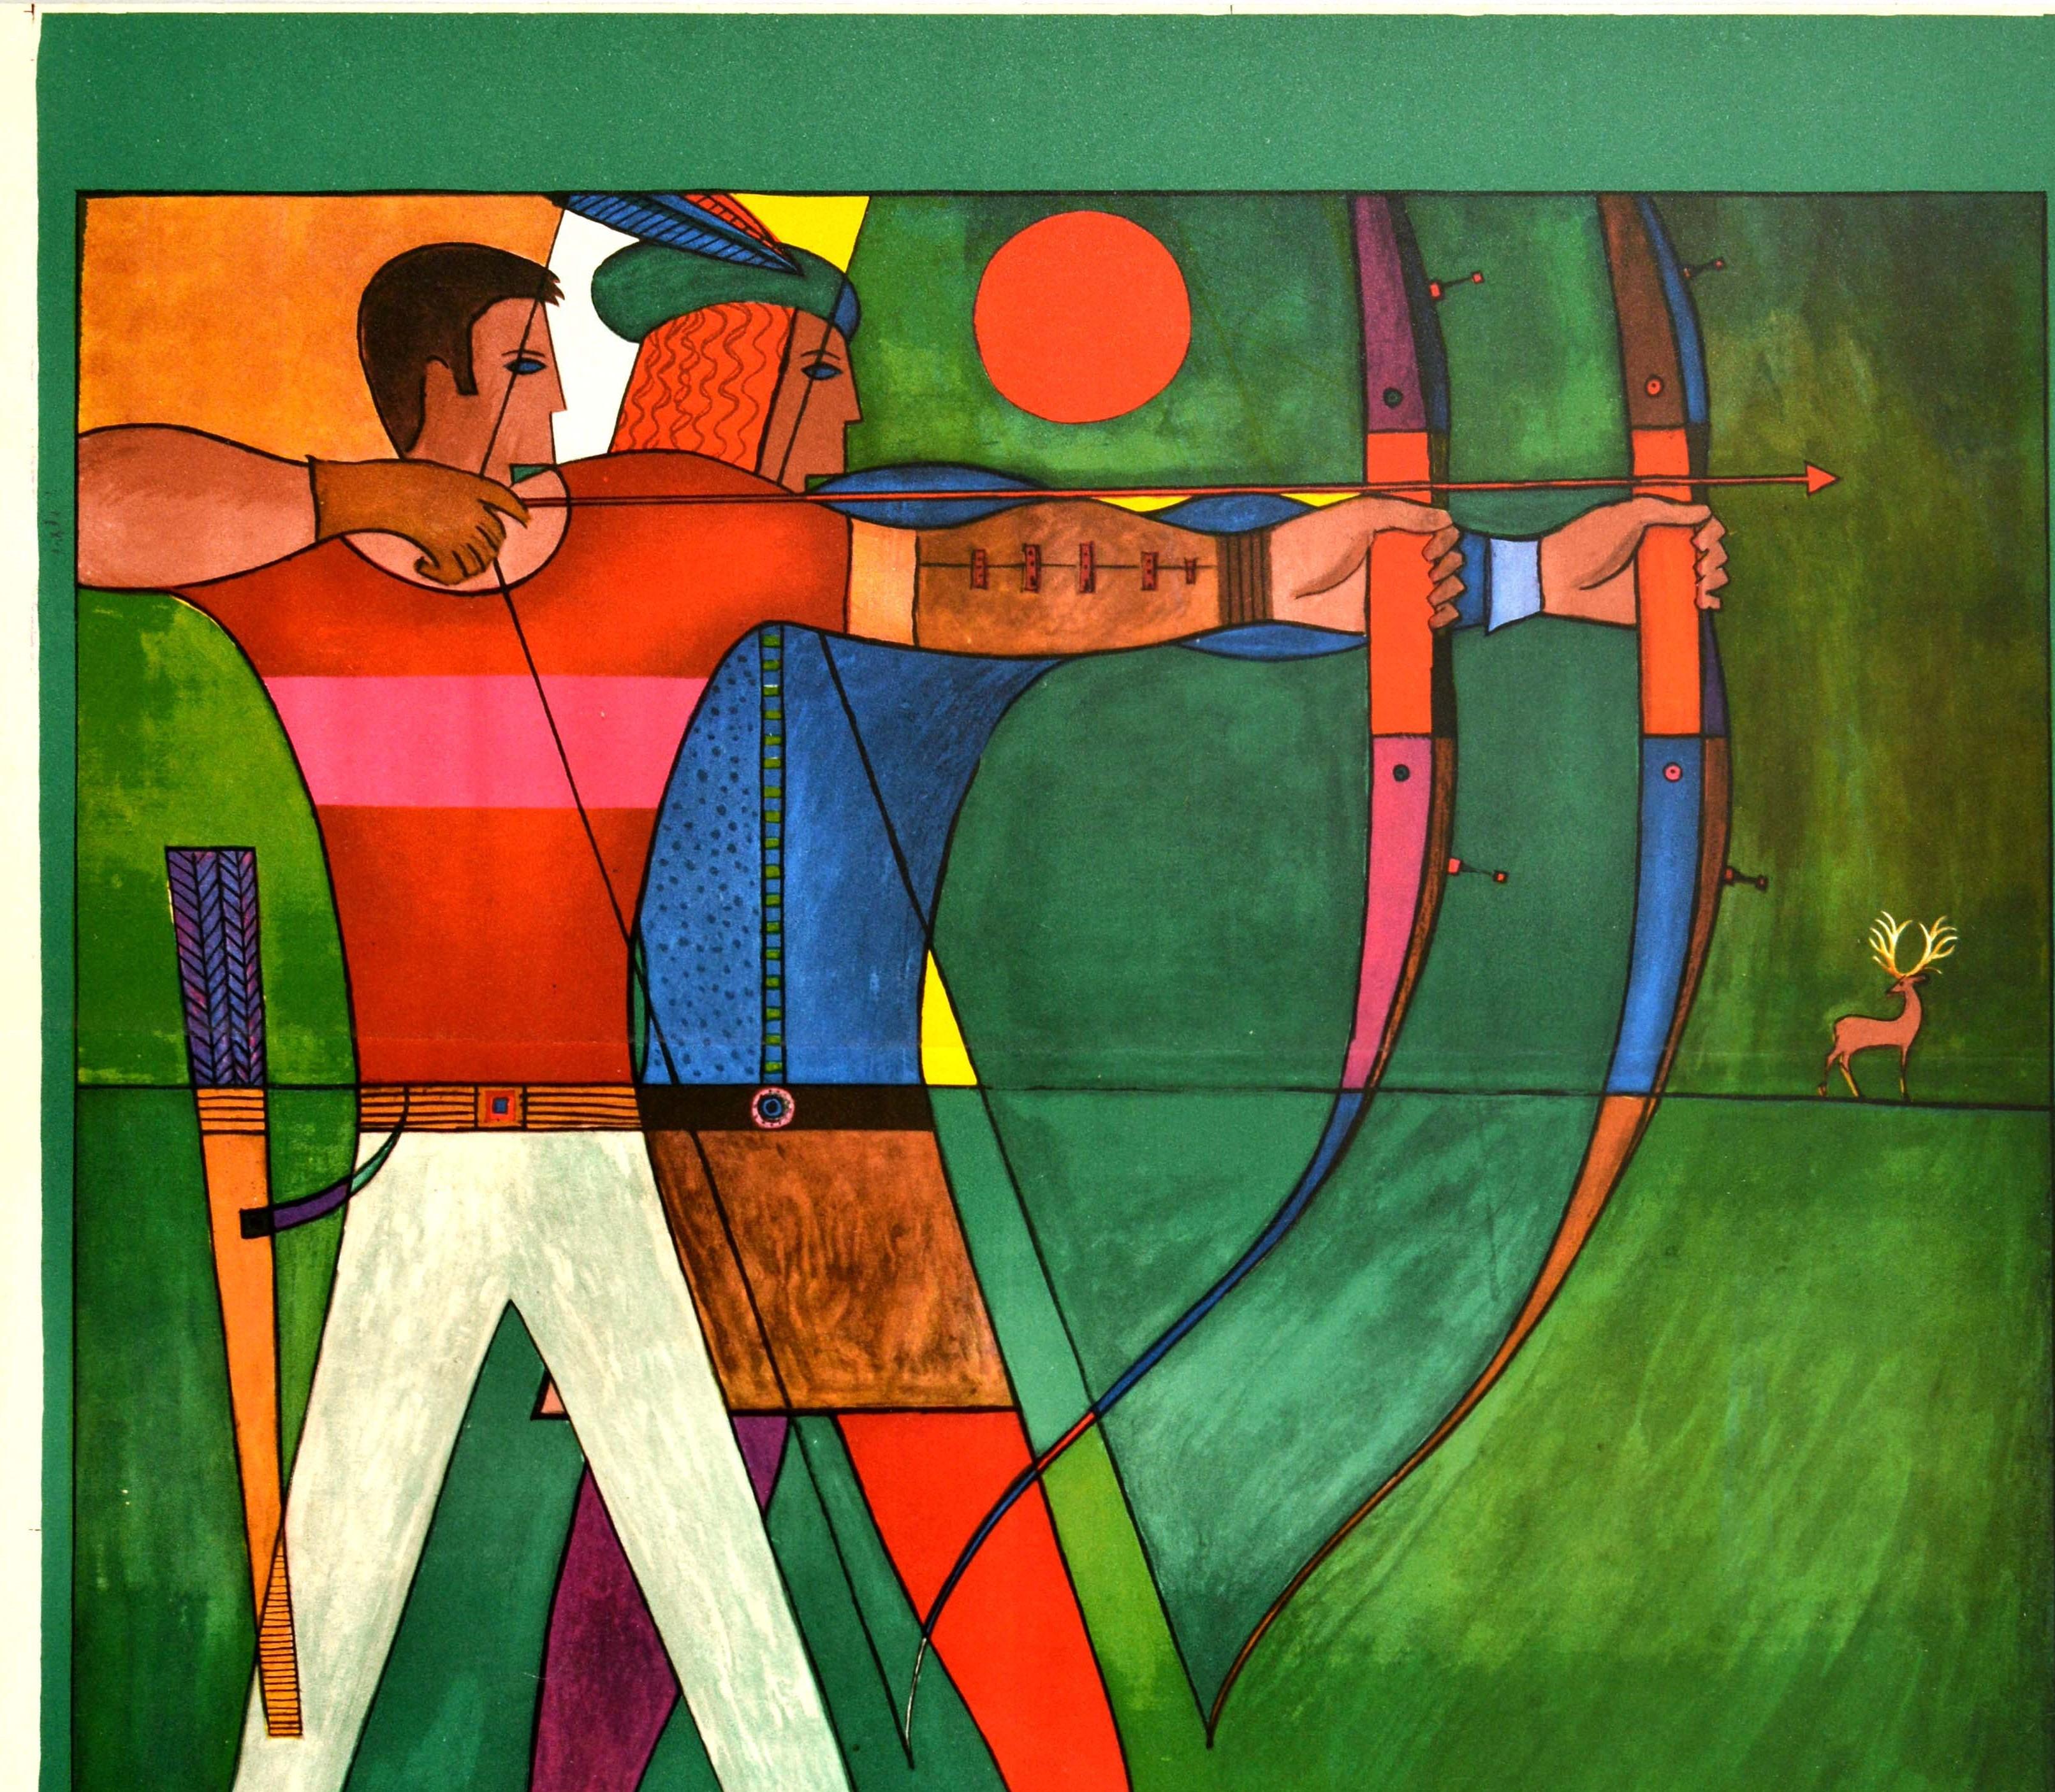 Original vintage Soviet sports poster - ???????? ?? ???? Archery - featuring a great design depicting two archers with arrows in their bows against a green background with a red sun behind them and a golden antler stag in the distance, the man